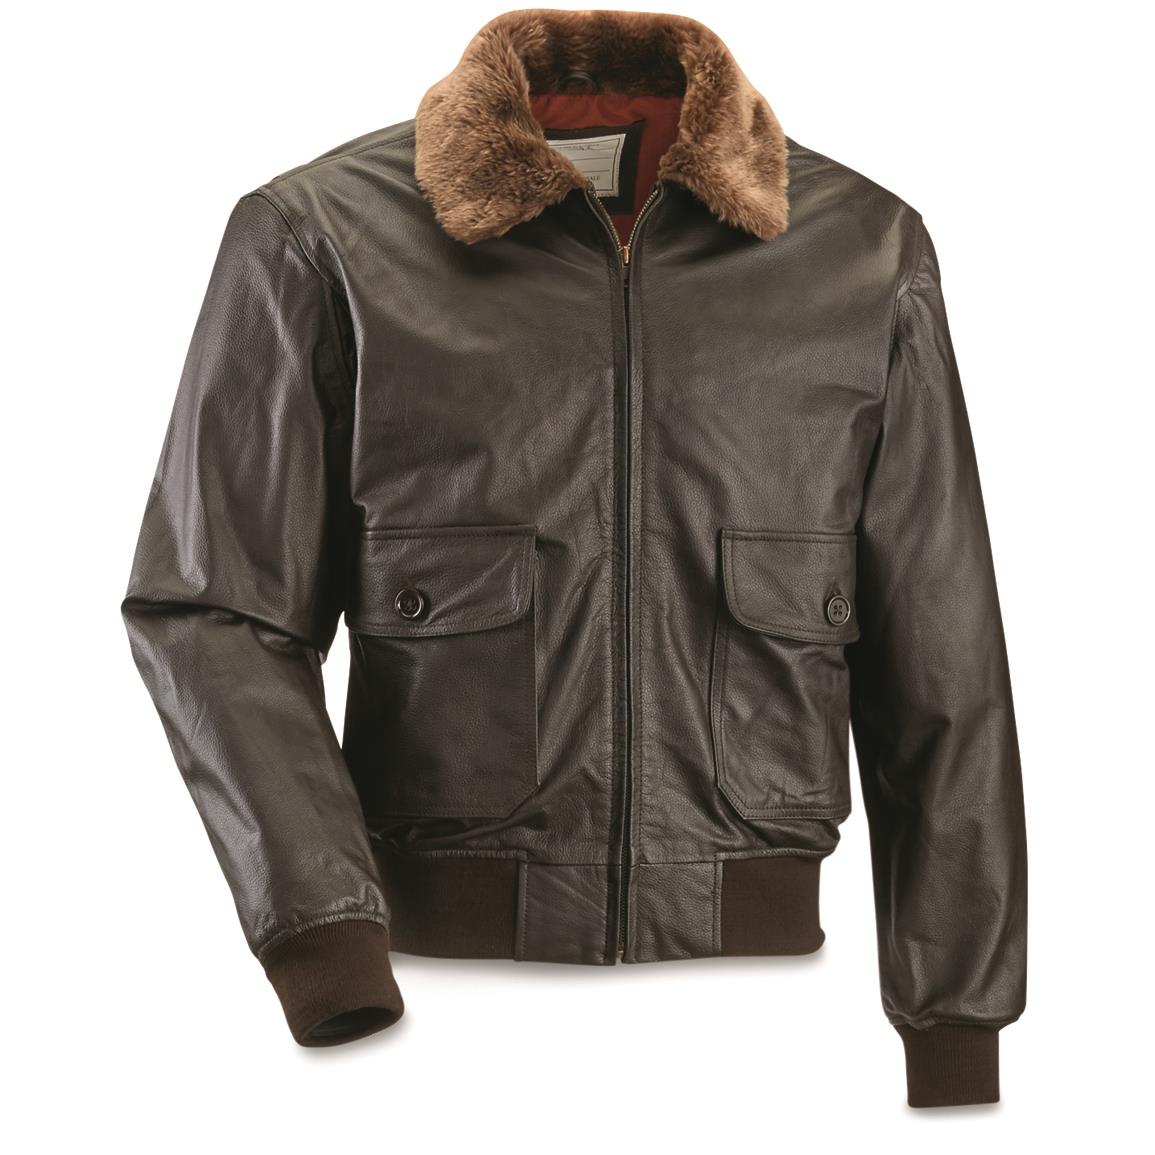 Reproduction U.S. Navy G1 Leather Flight Jacket - 717577, Insulated Military at Sportsman's